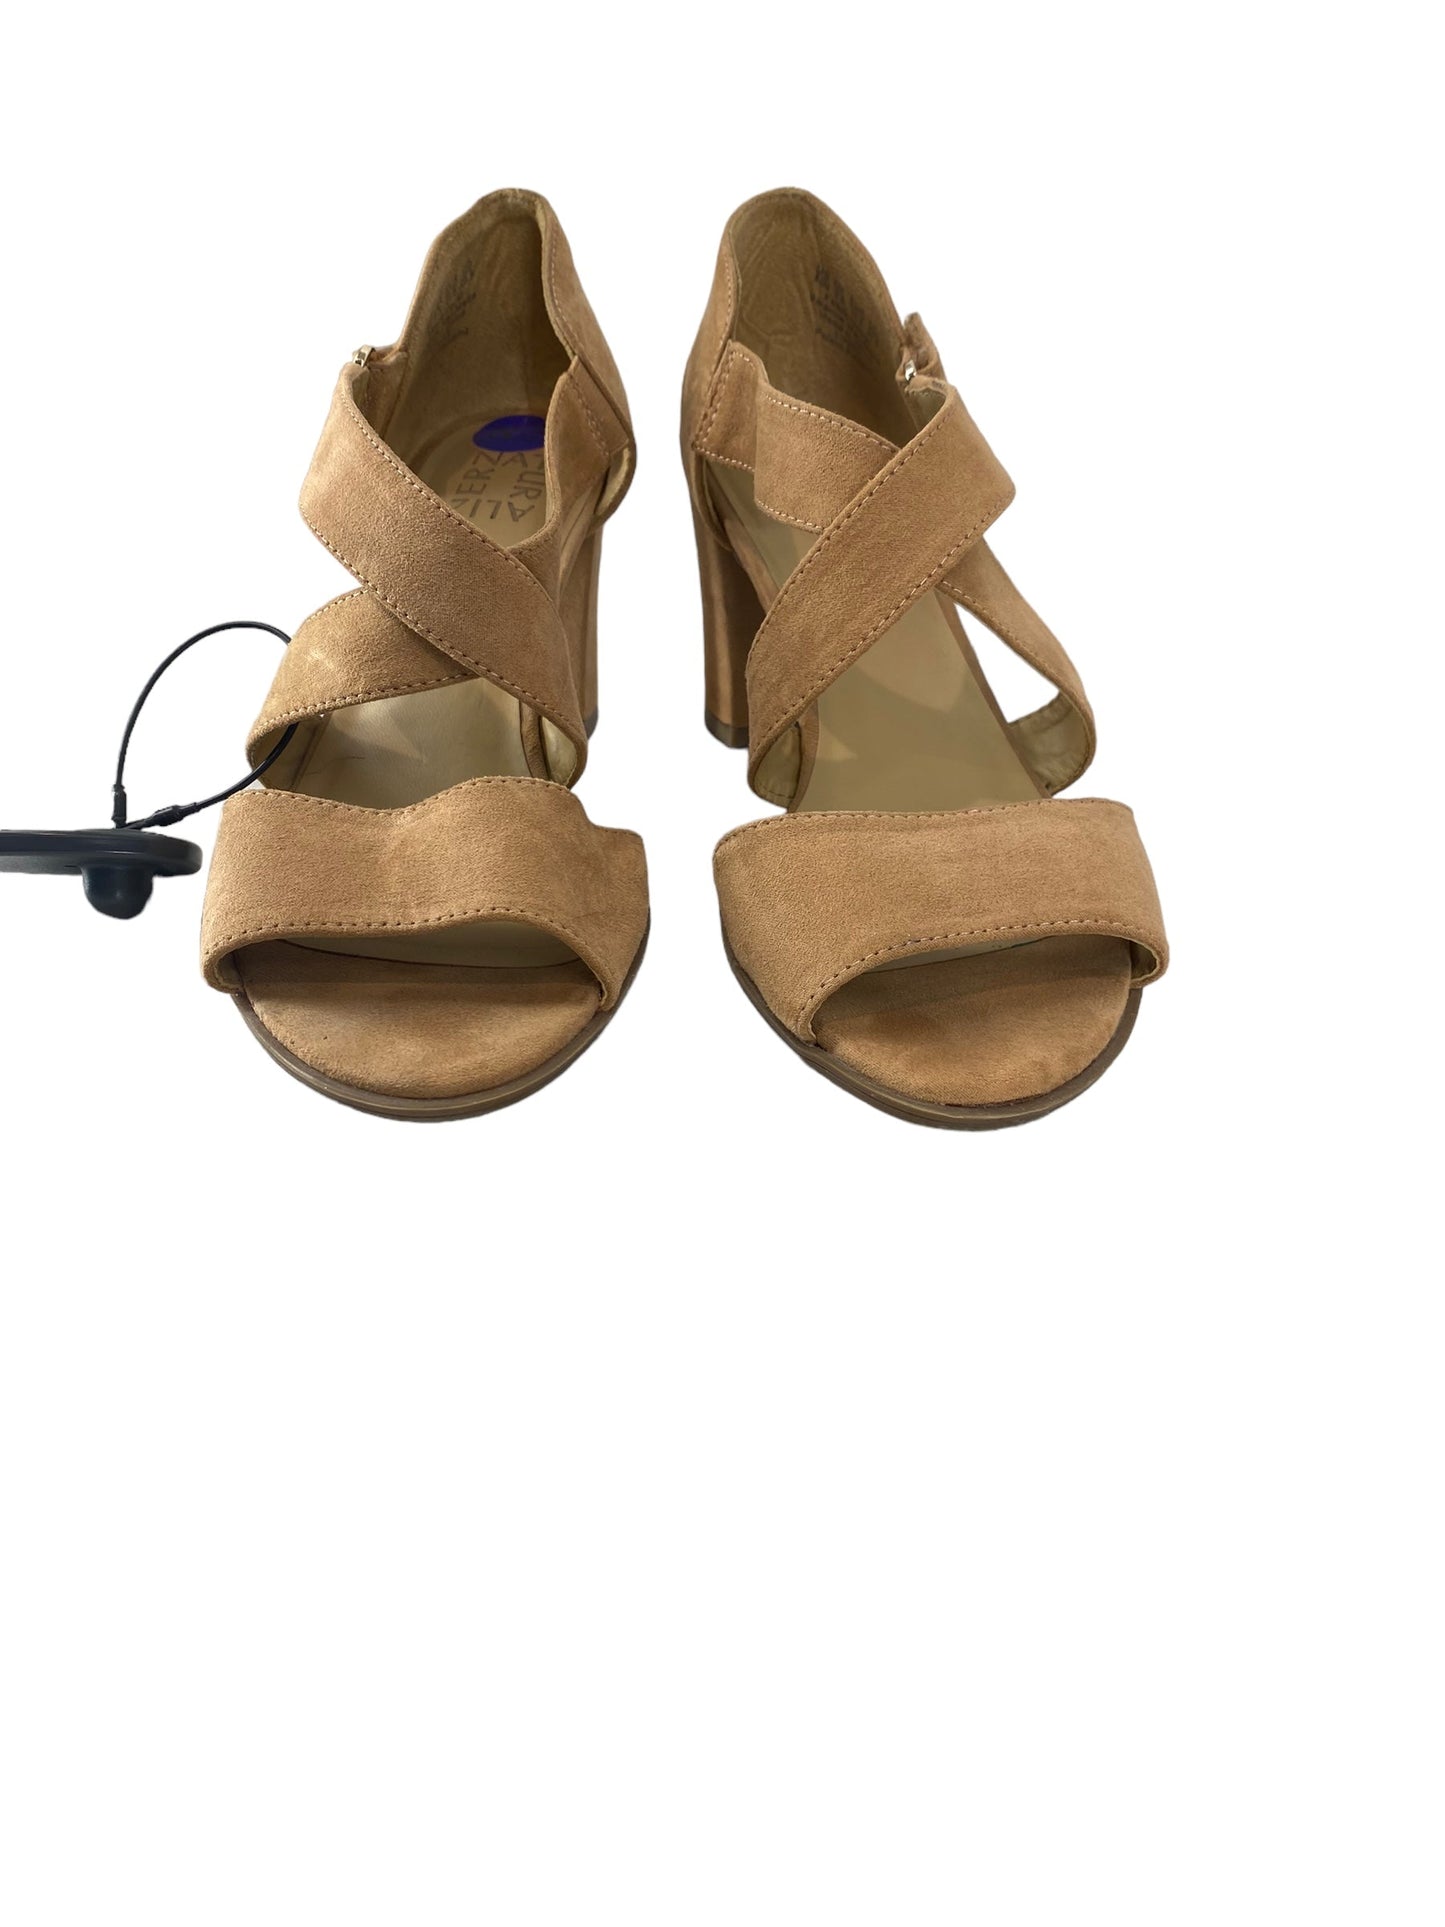 Sandals Heels Block By Naturalizer  Size: 8.5